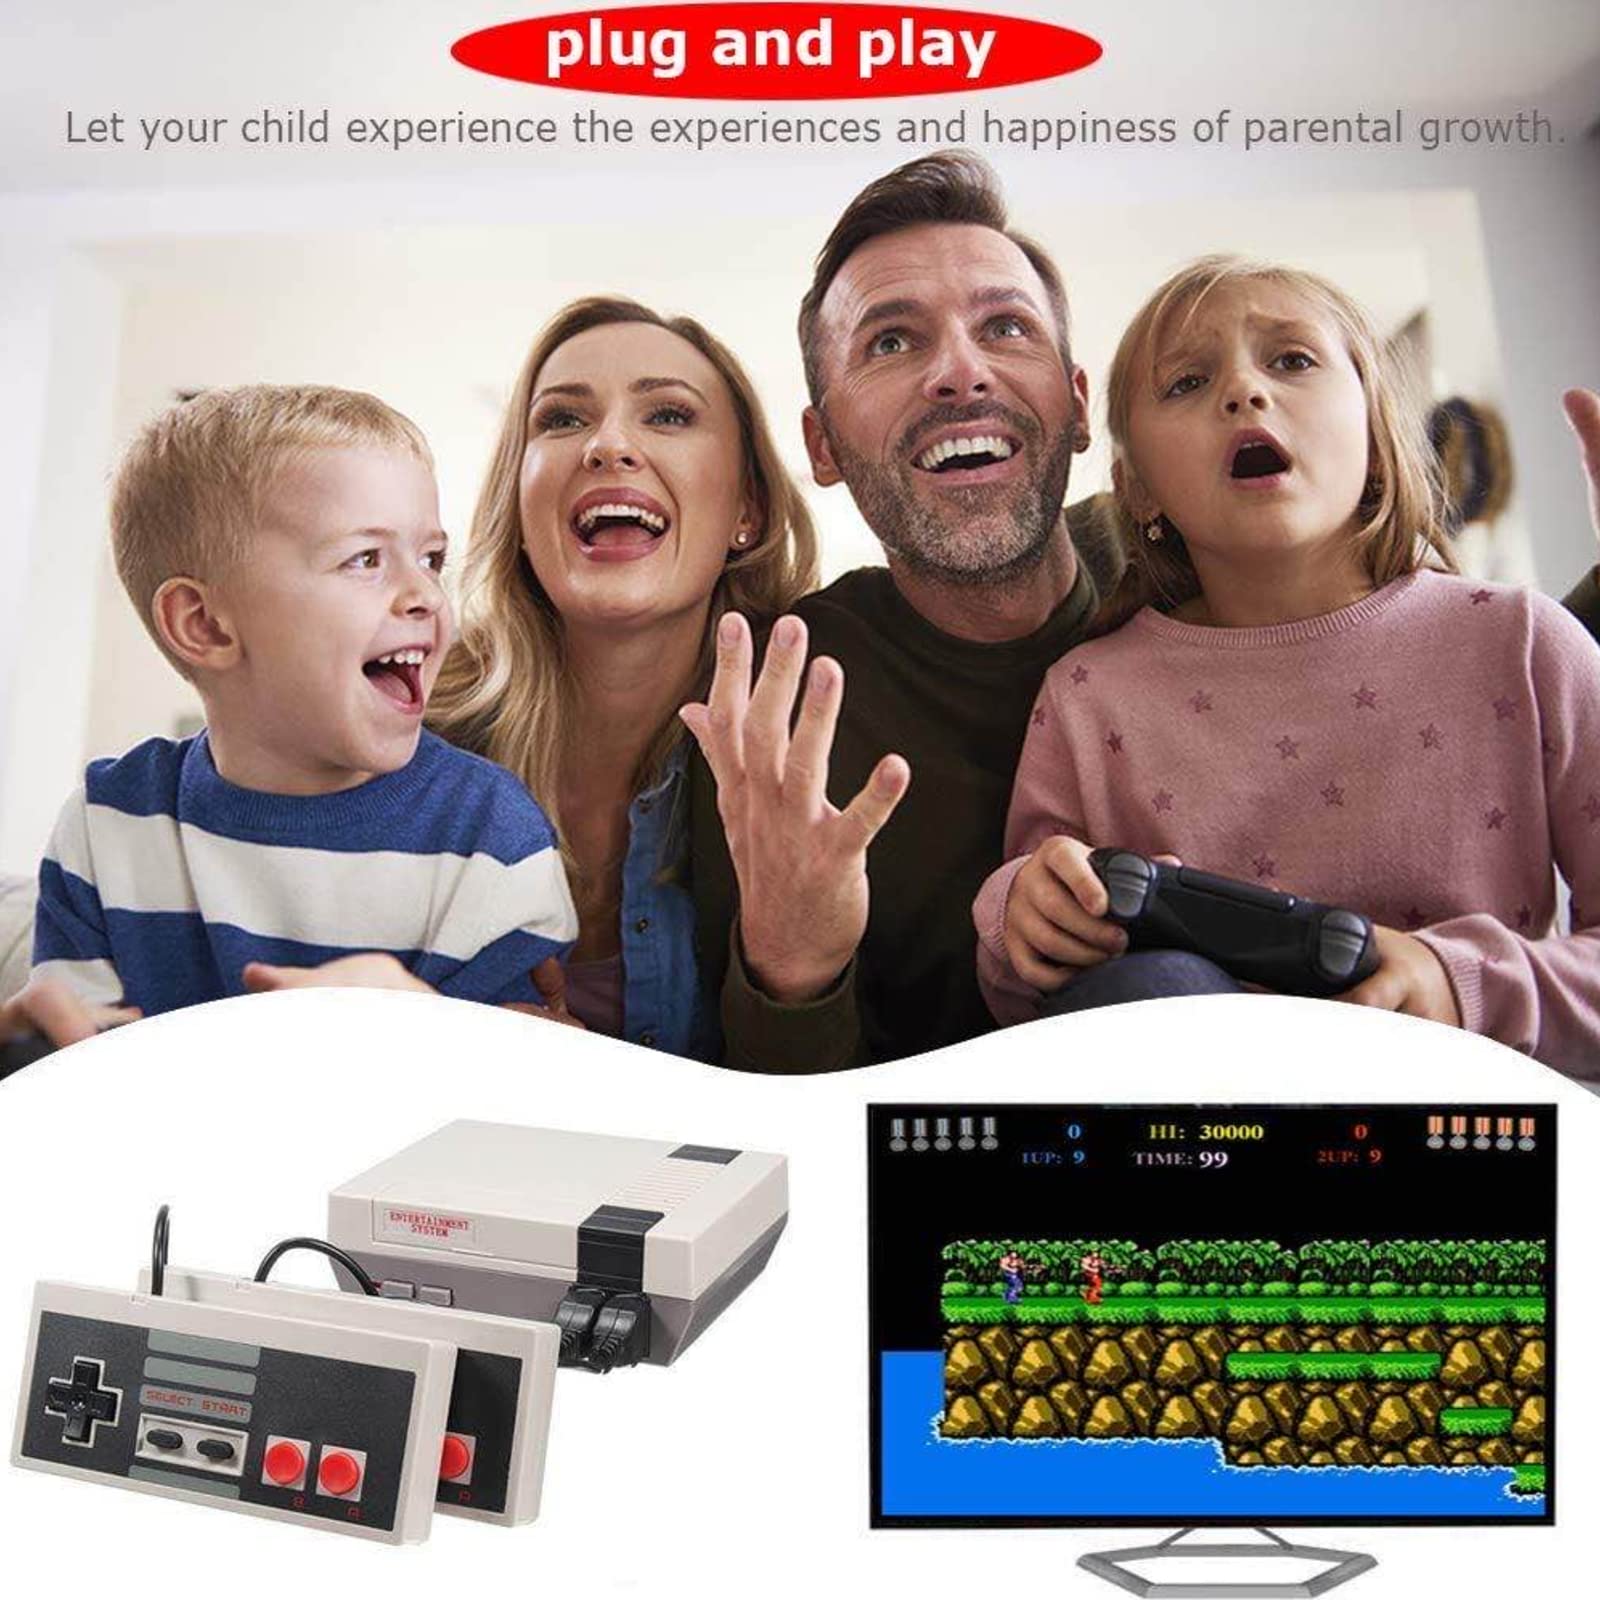 RISEMITEL Classic Retro Game Console, 8-Bit Gaming System, Built-in 620 Video Games and 2 Classic Controllers, AV and HDMI HD Output Video Games for Ideal Gift for Kids and Adults